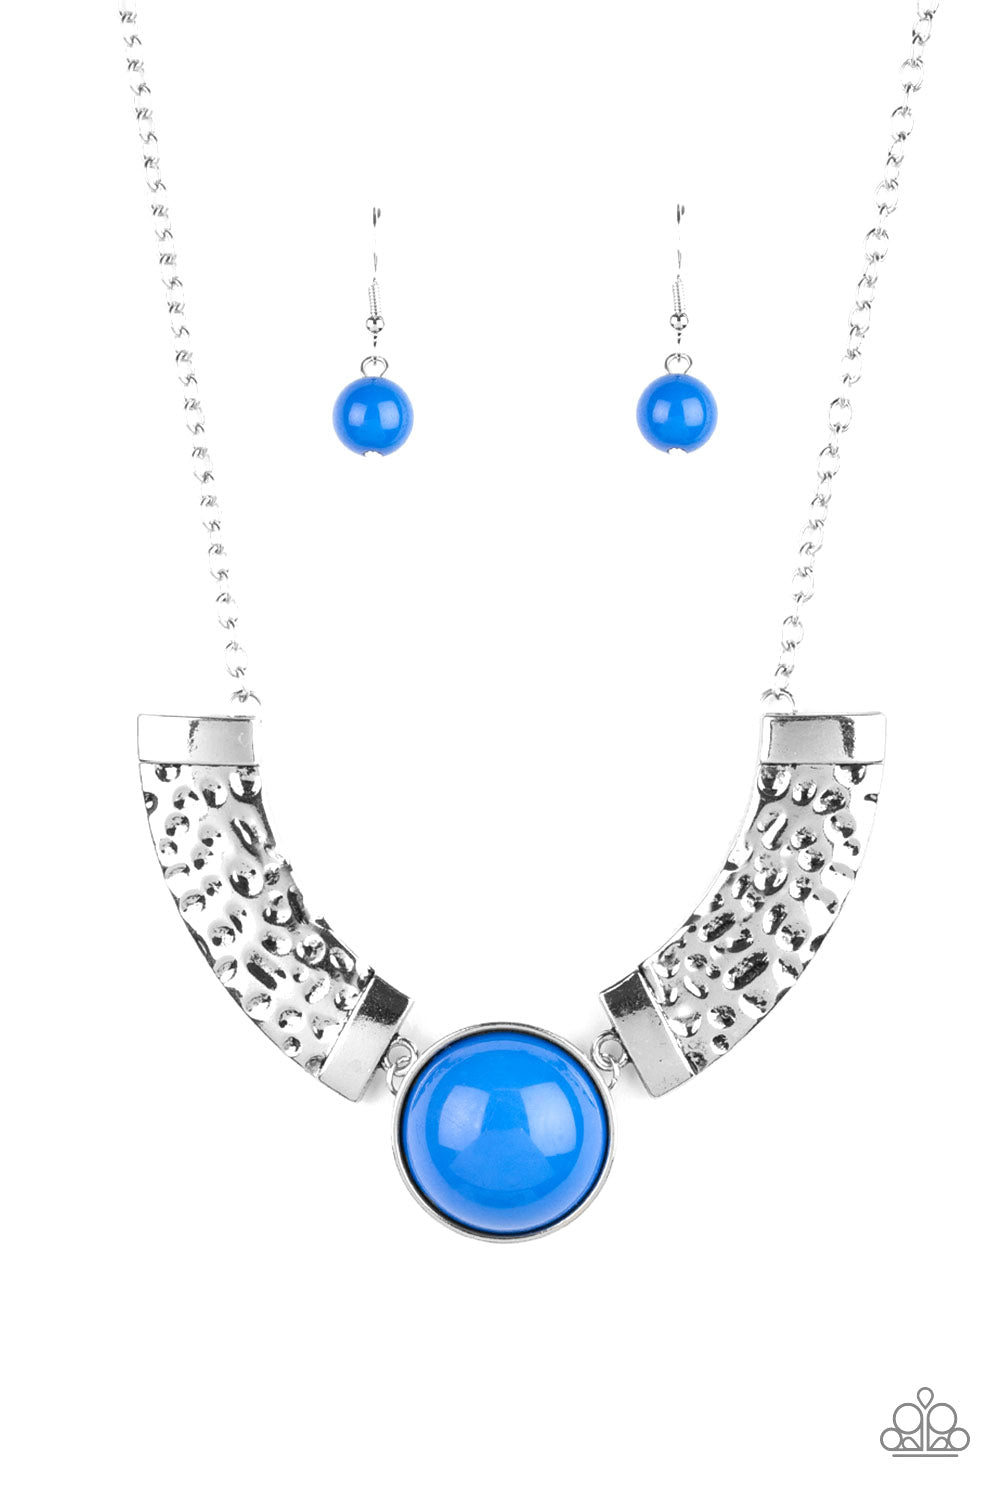 Dramatic silver plates connect with a shiny blue beaded center, creating an indigenous collar-like pendant. The shiny silver plates are delicately hammered, adding a flashy metallic texture to the tribal inspired palette. Features an adjustable clasp closure.